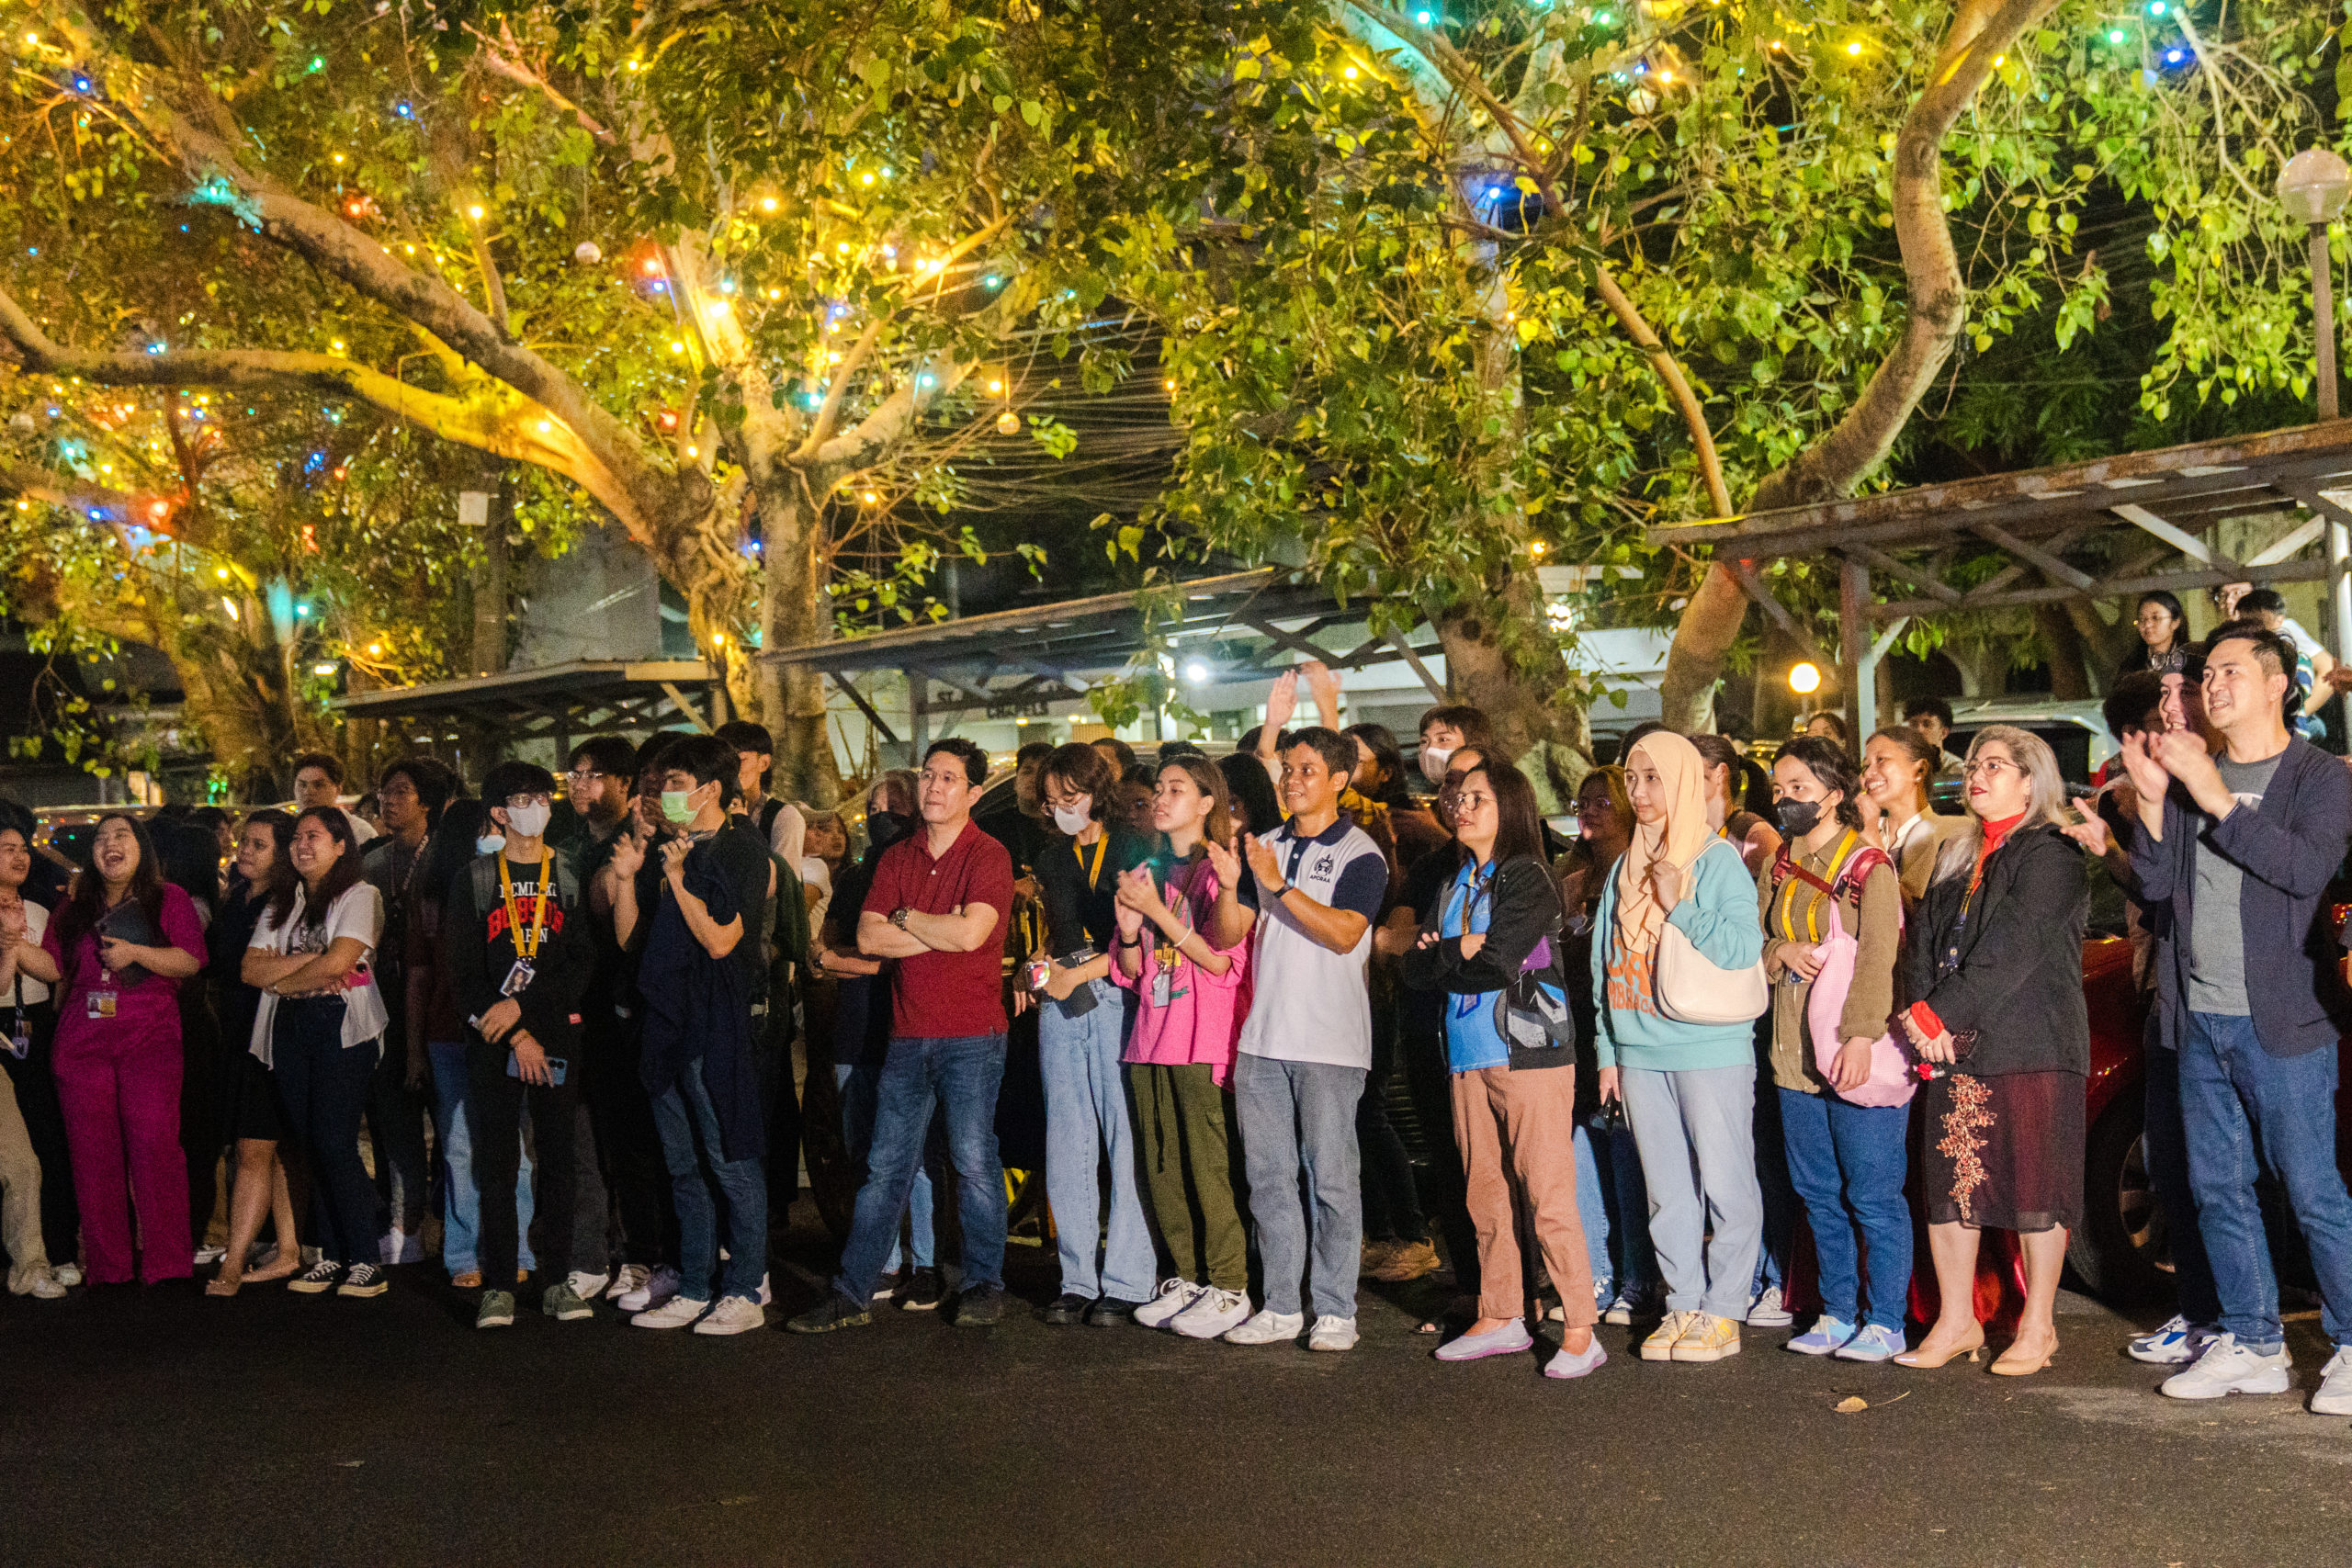 The APC community watches ‘Christmas Never Ends’ together at Humabon Parking Lot during the annual Christmas Lighting Ceremony. Photo by Johann Avery Marcalas